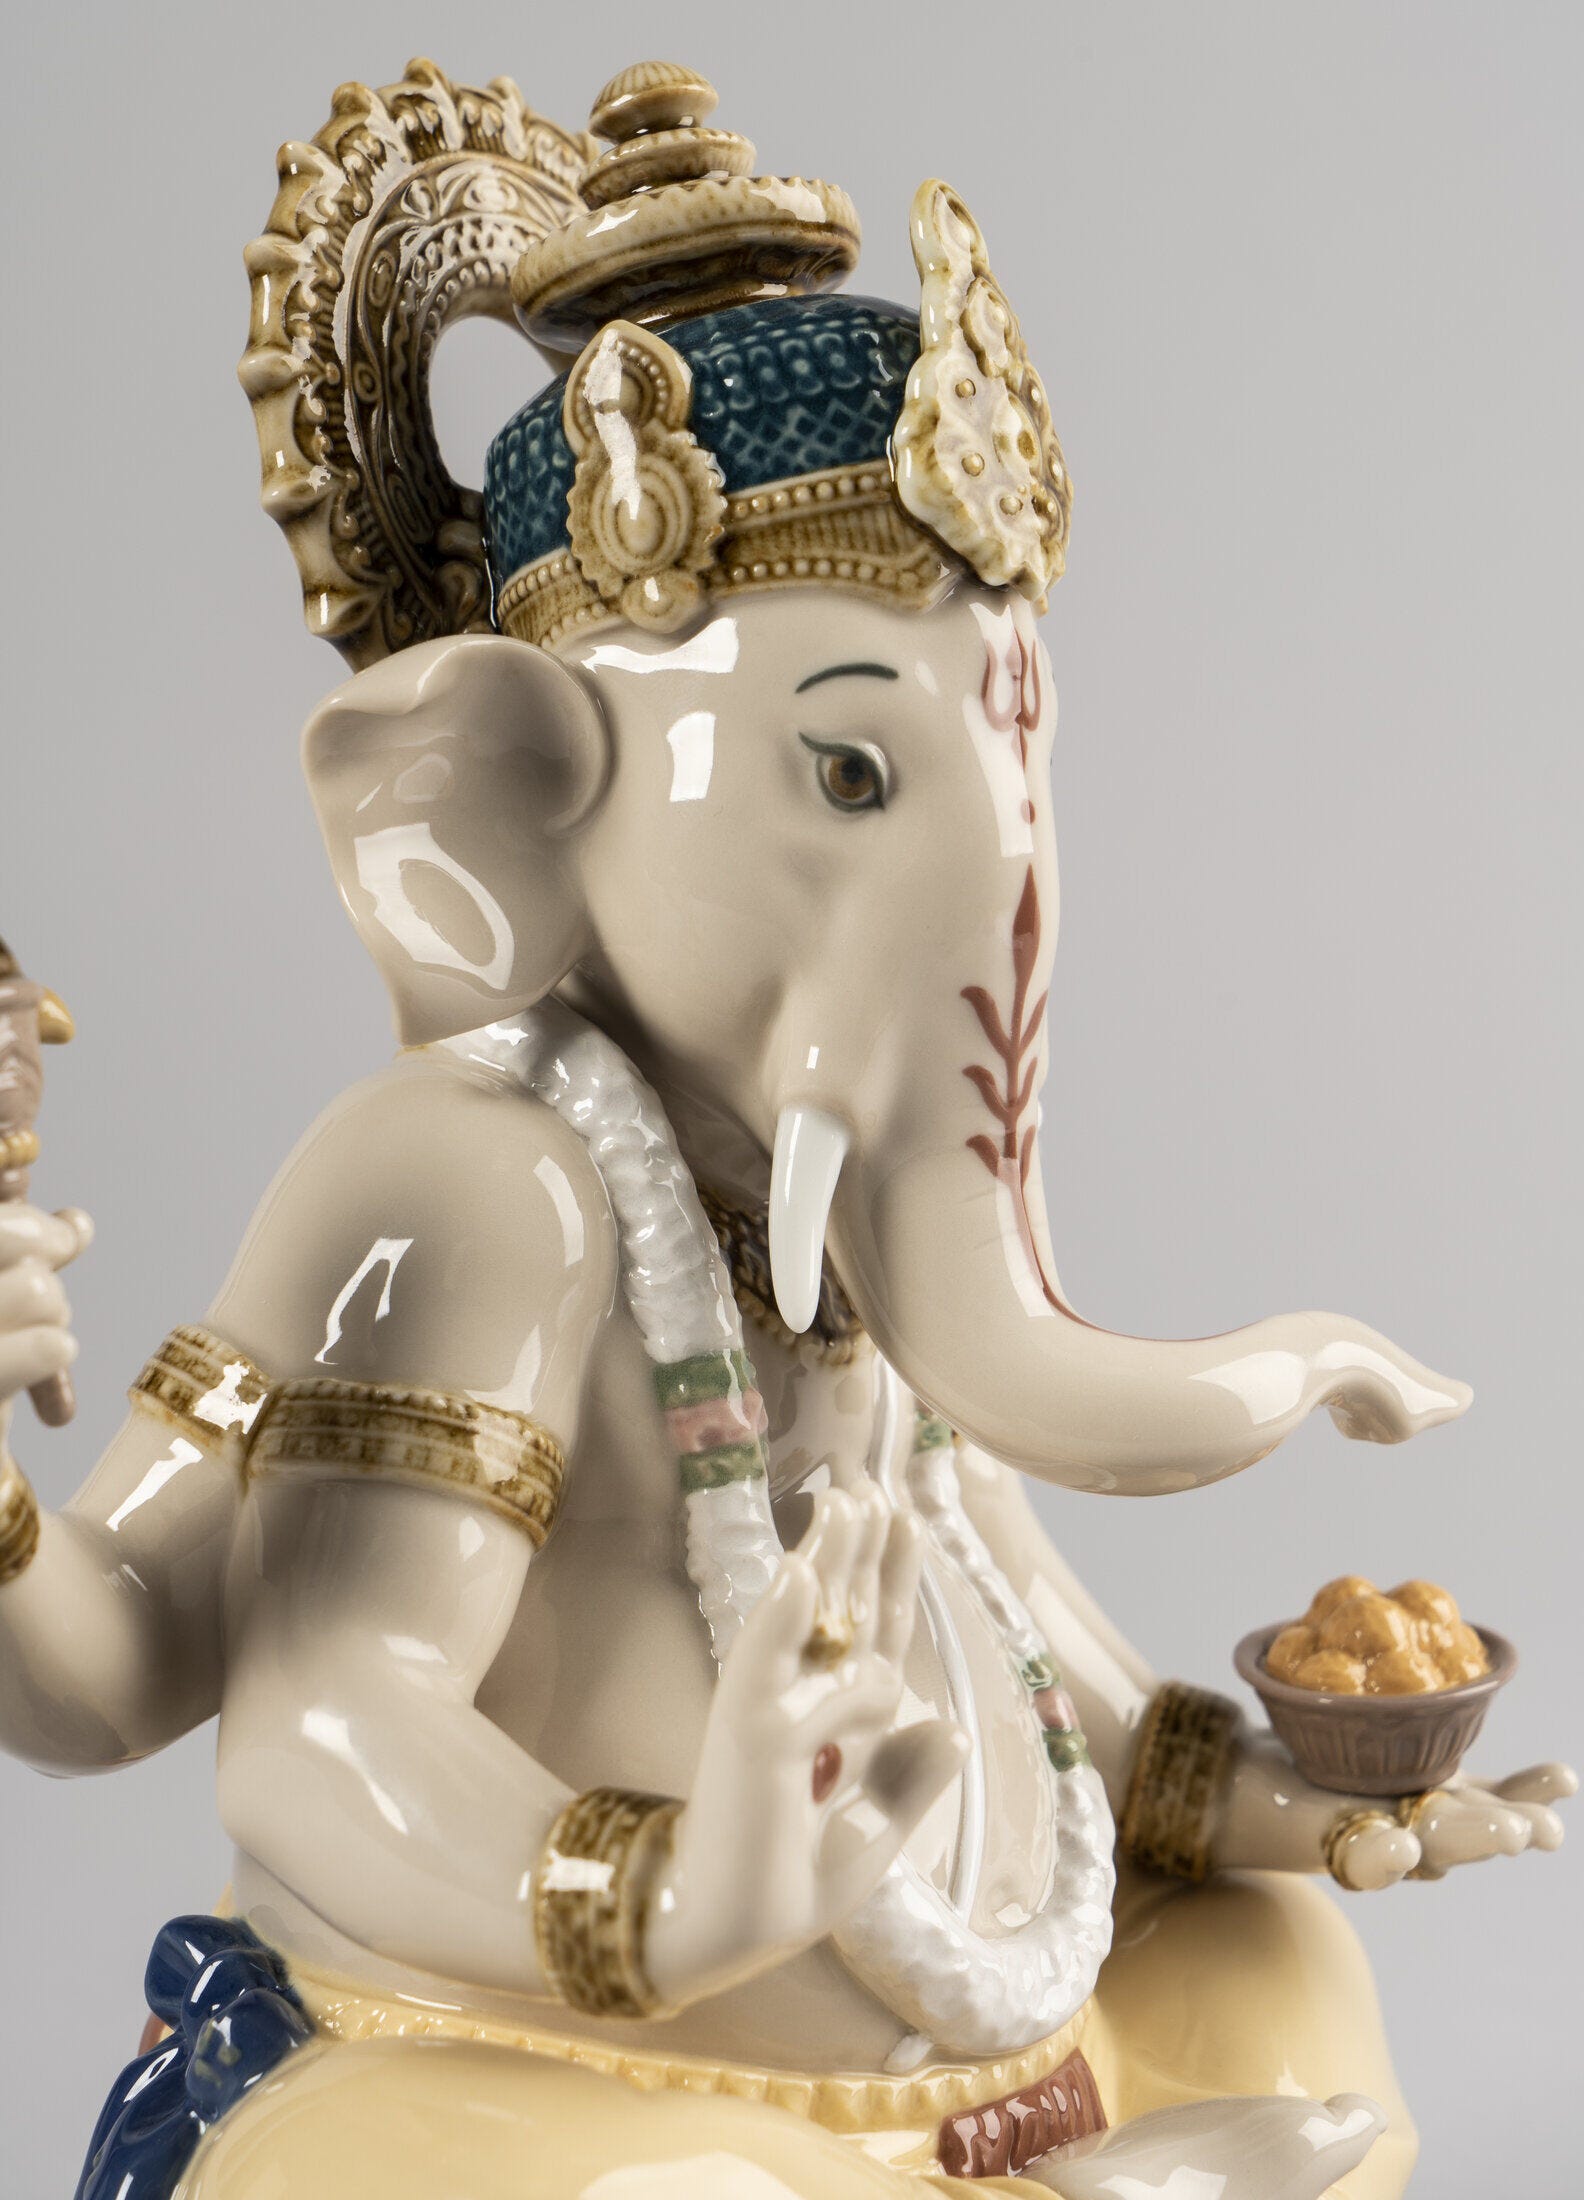 Vancouver yoga wear company apologizes for Lord Ganesha-inspired